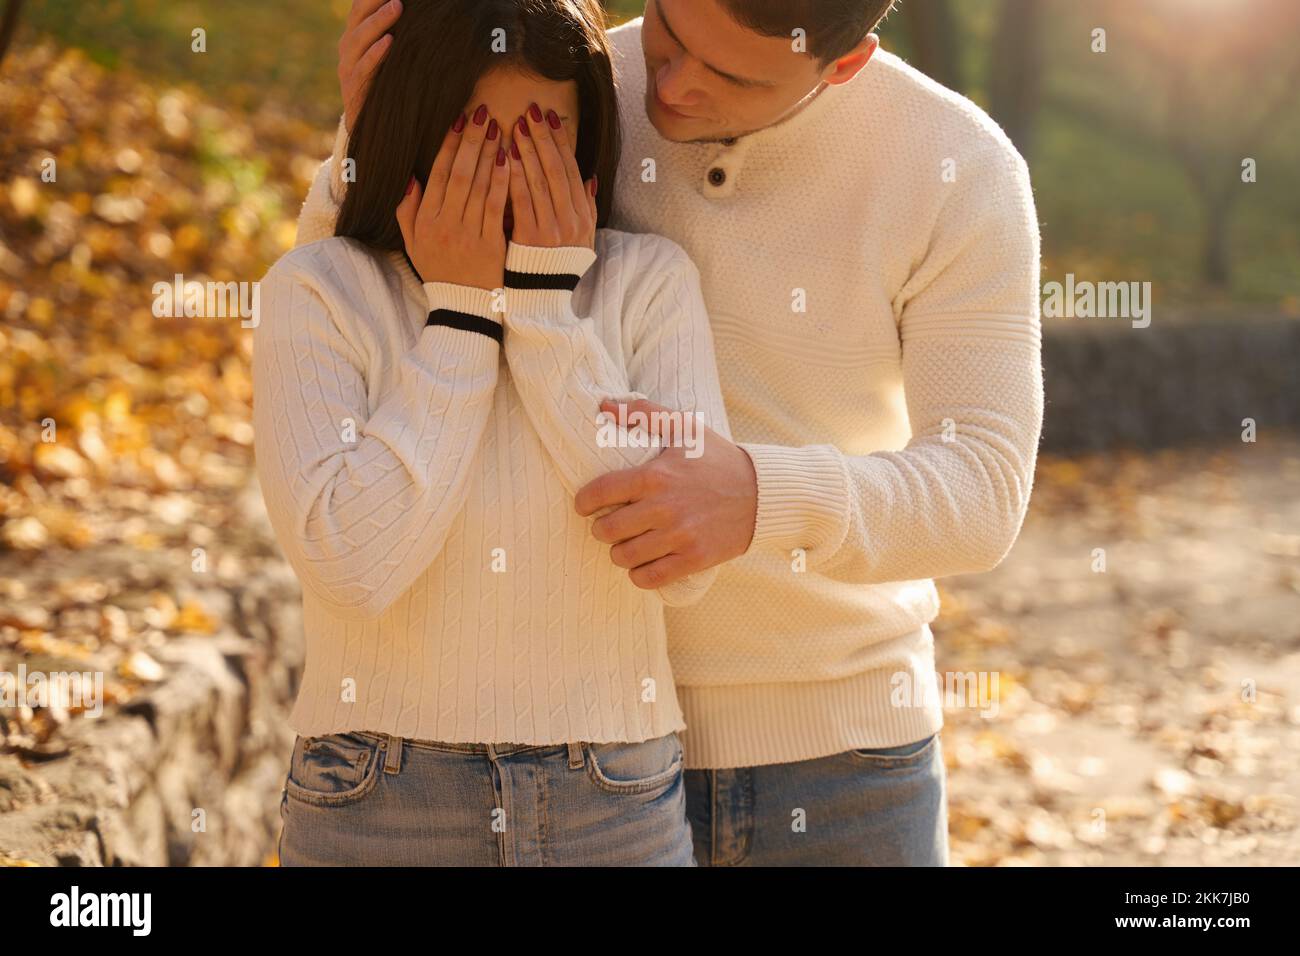 Guy gently comforts a crying girlfriend in a city park Stock Photo